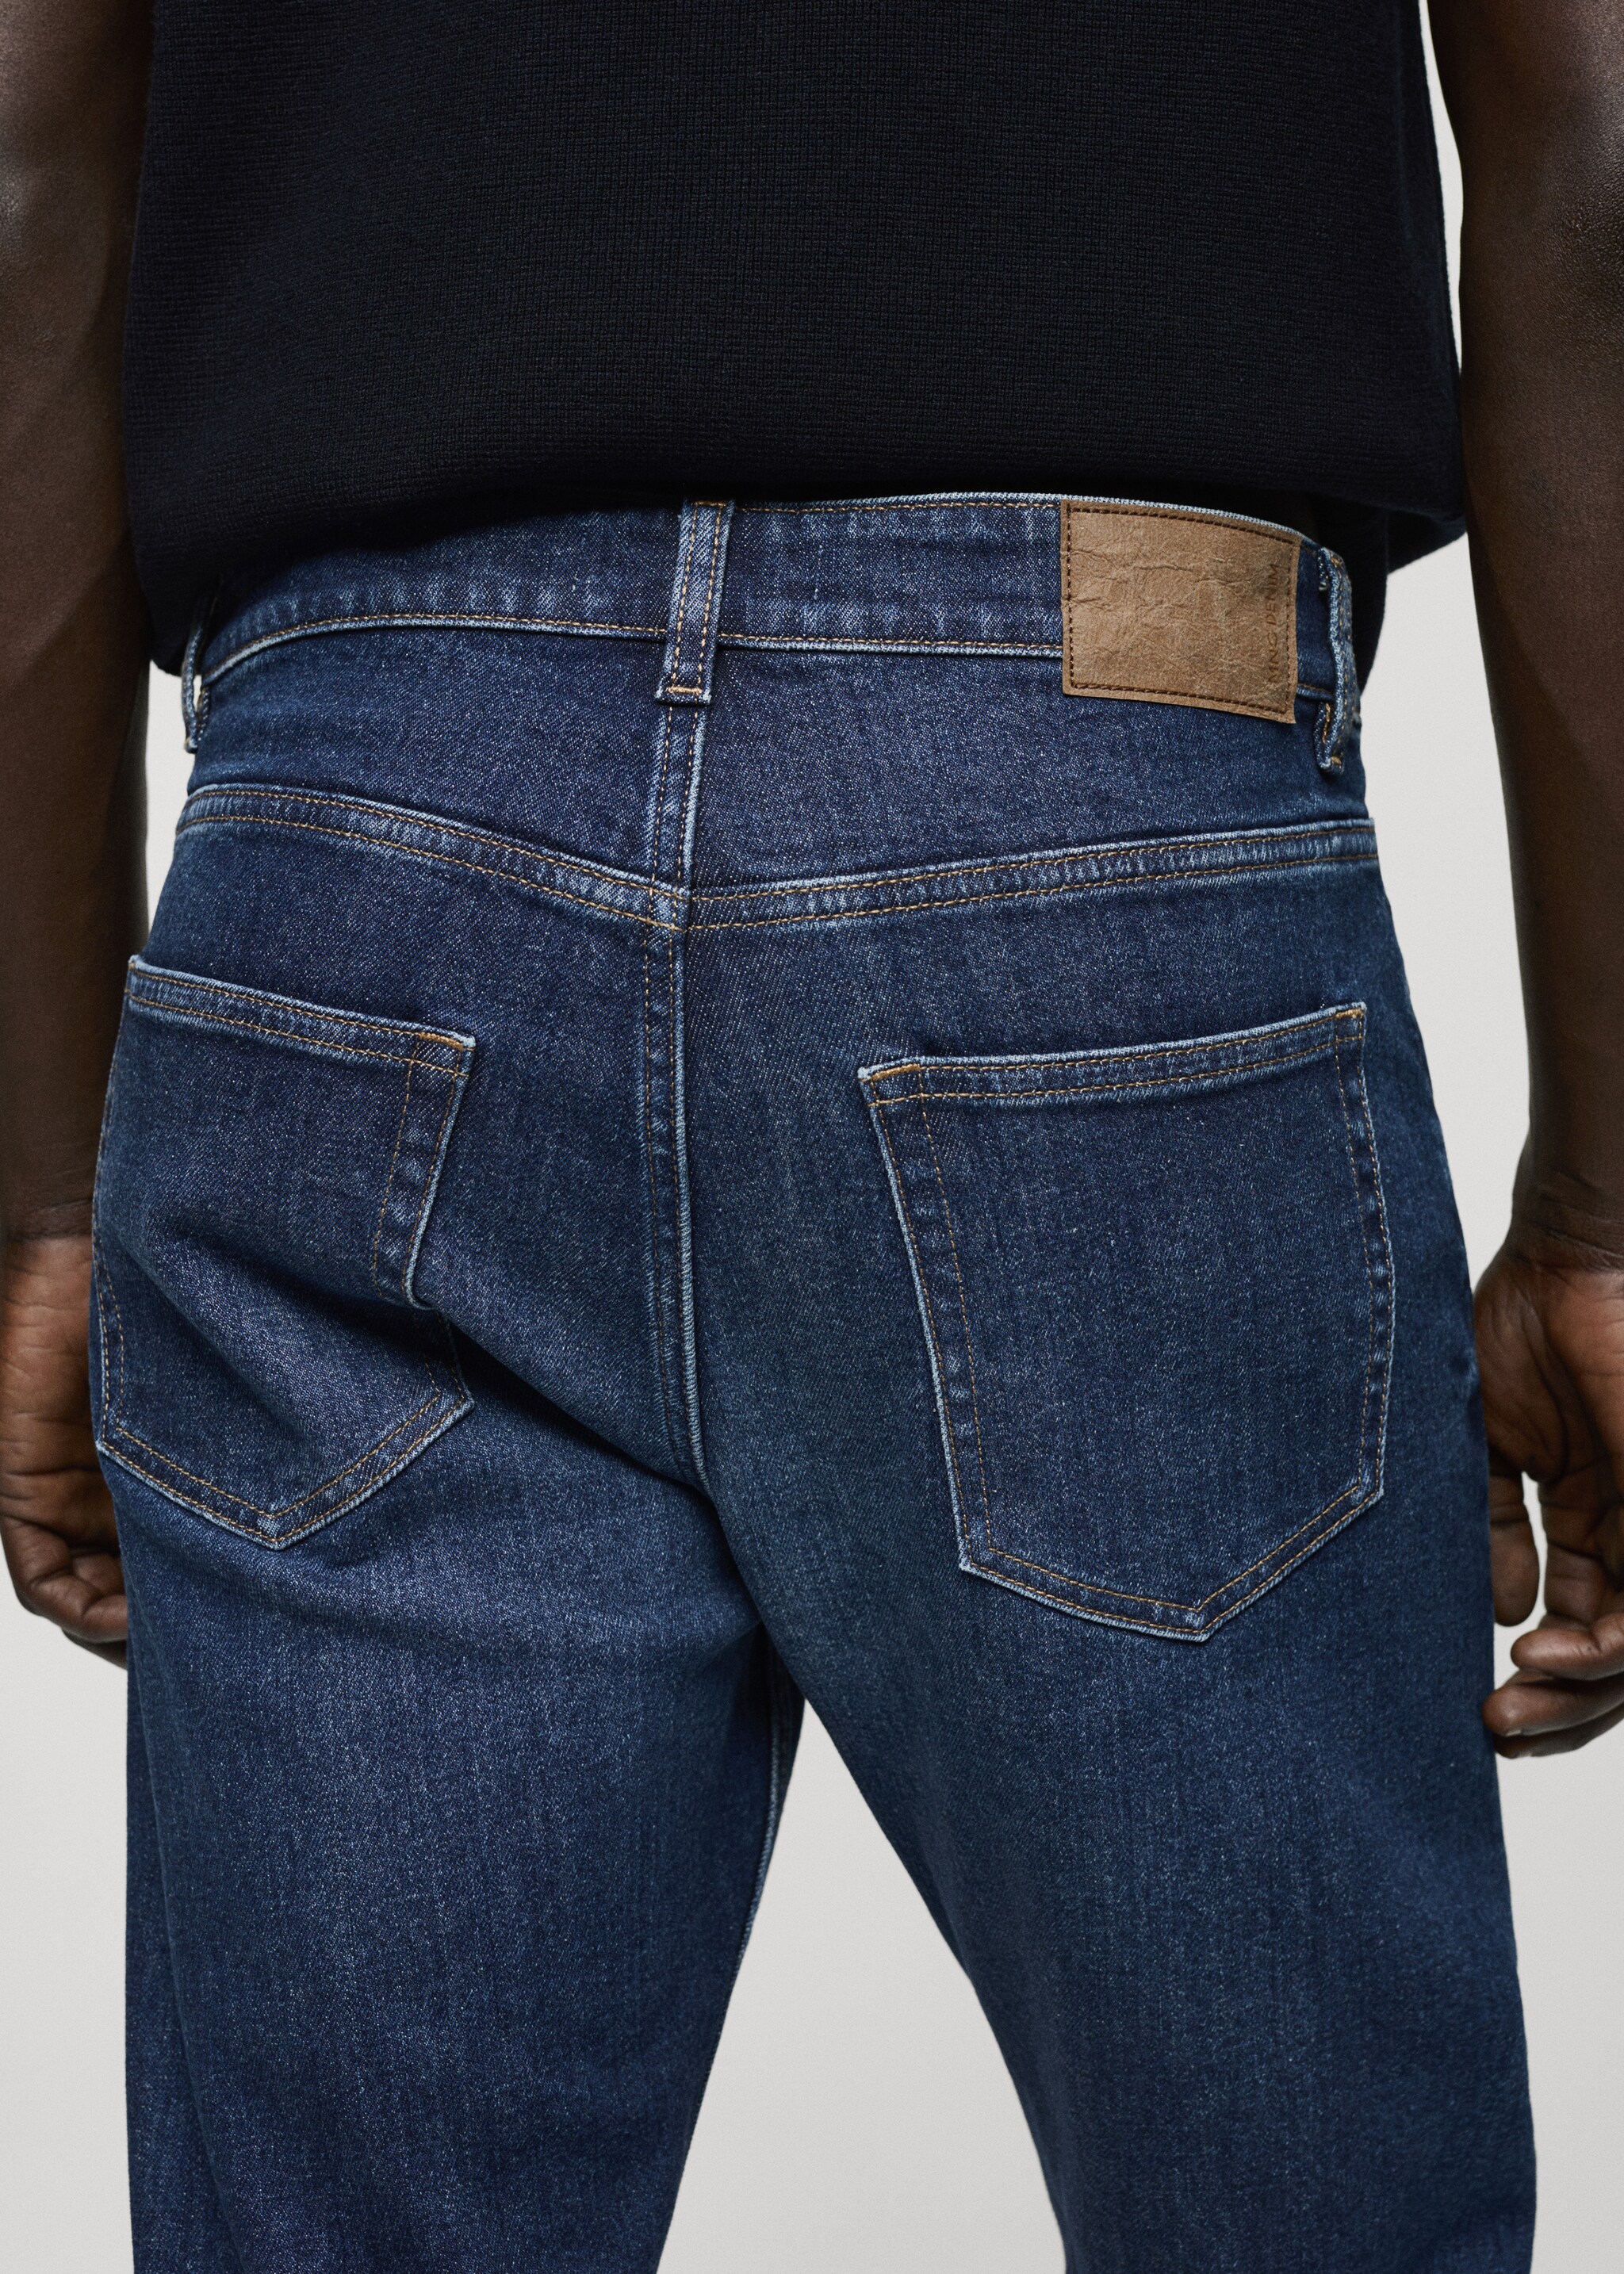 Ben tapered-fit jeans - Details of the article 6